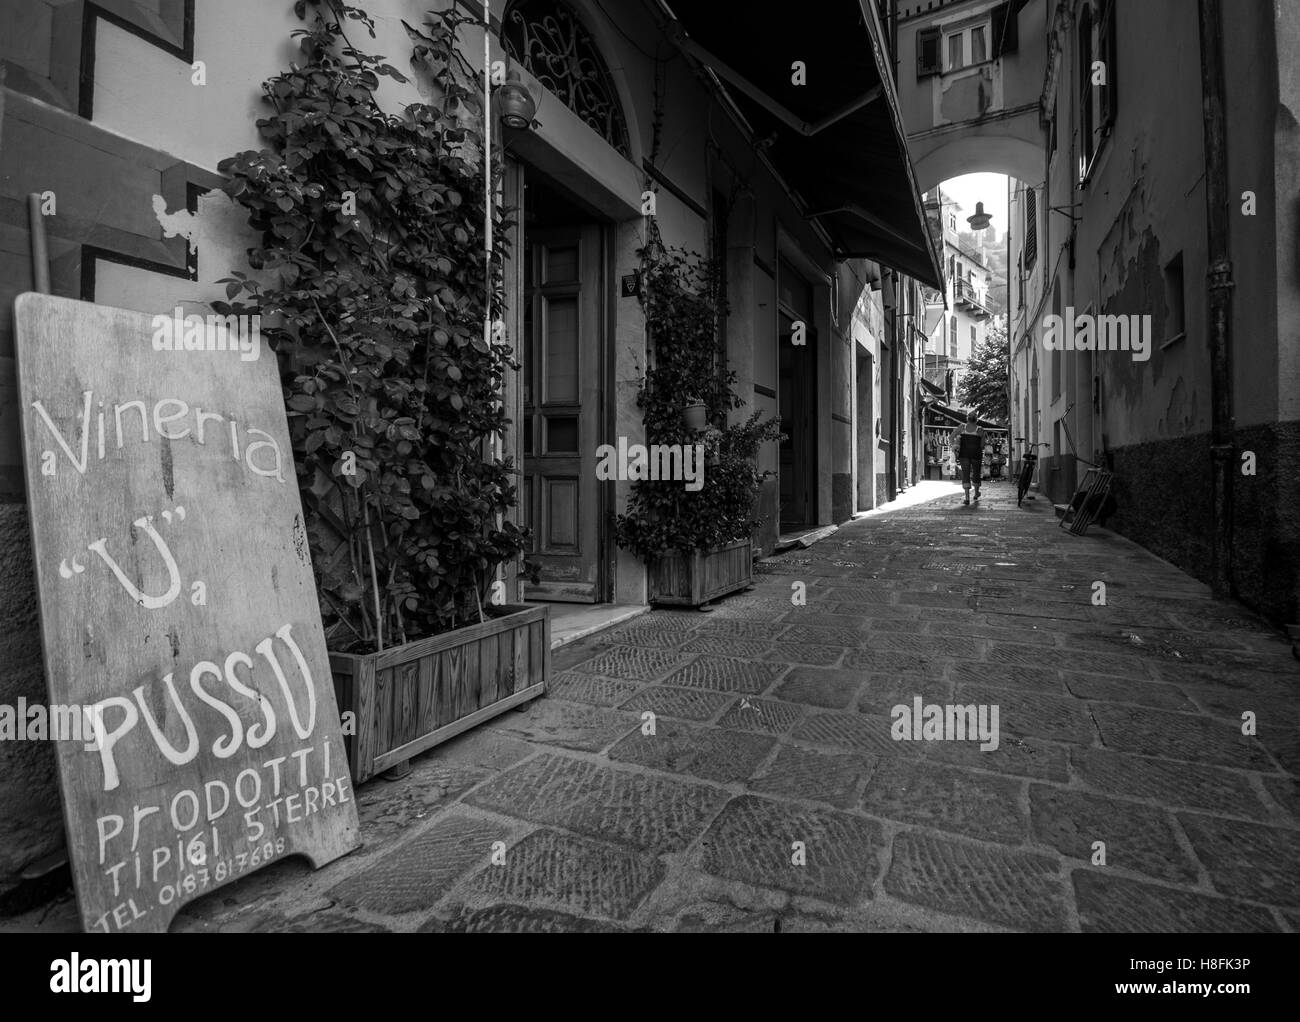 A shopfront in traditional architectural style and walkway, Cinque Terre, Italy, September. Converted to black and white Stock Photo